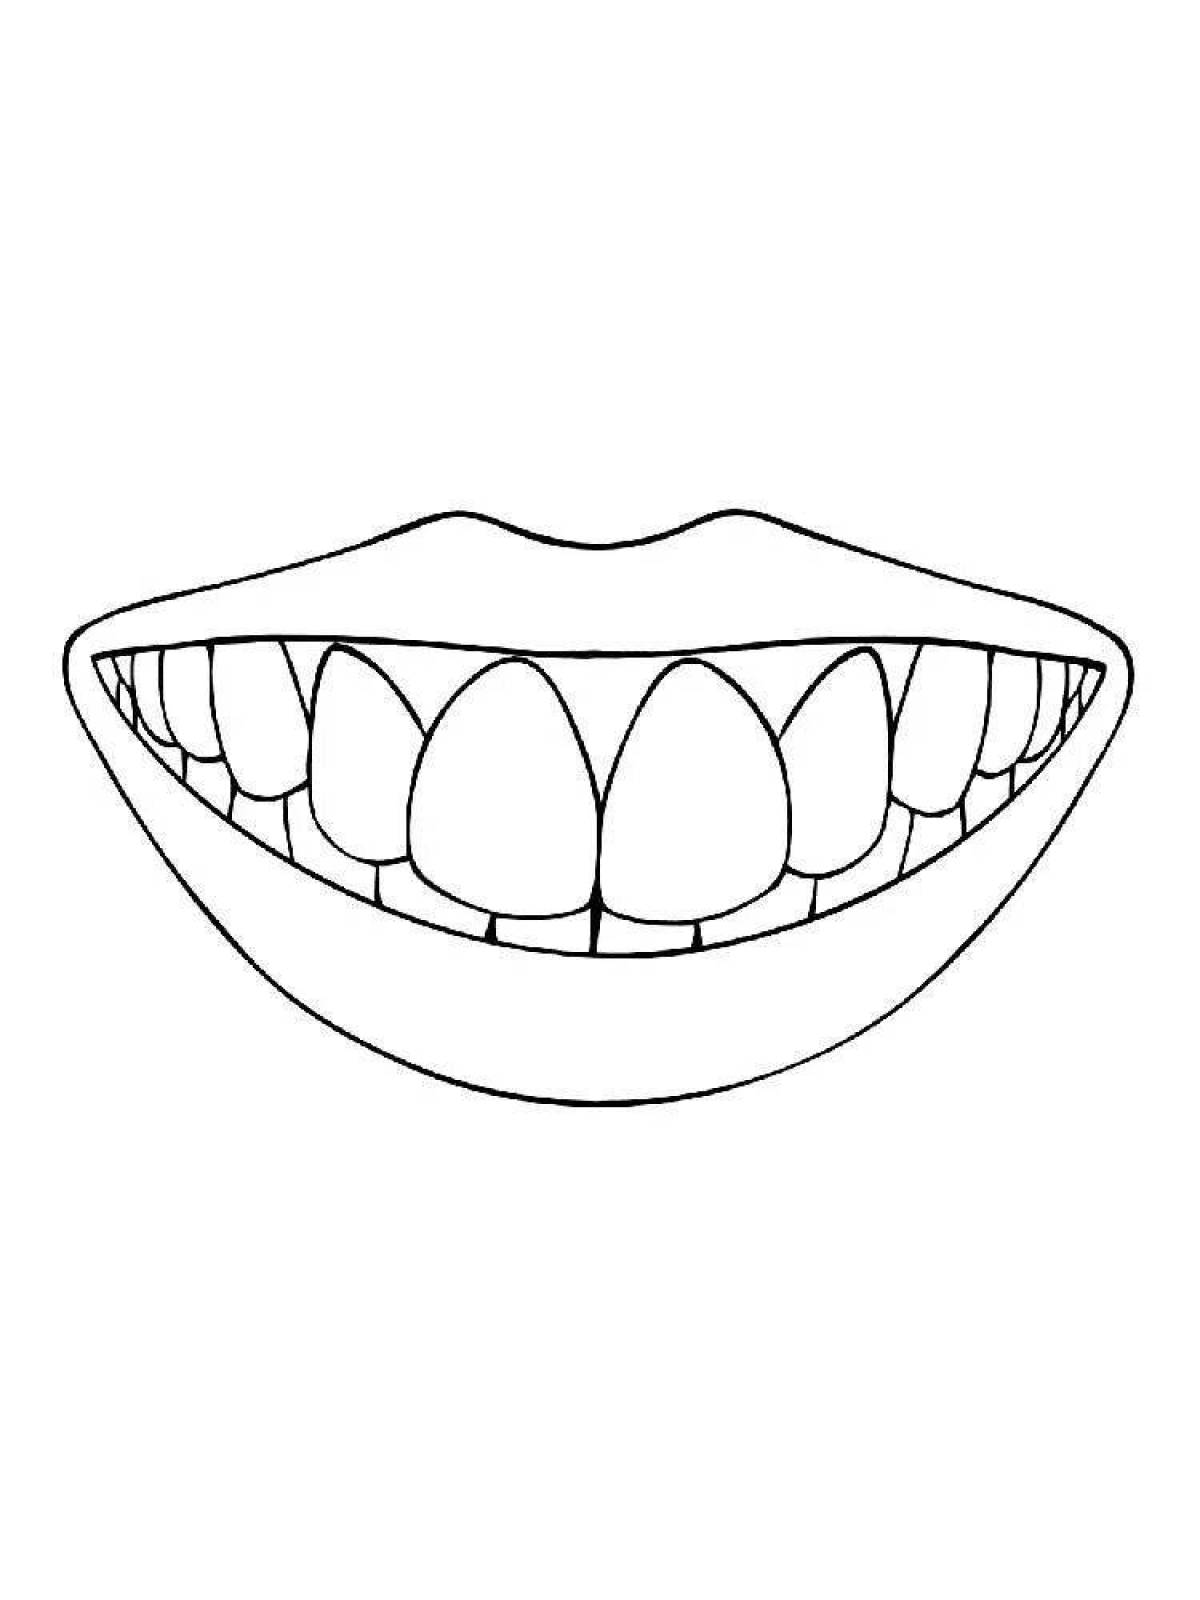 Tender coloring page smile